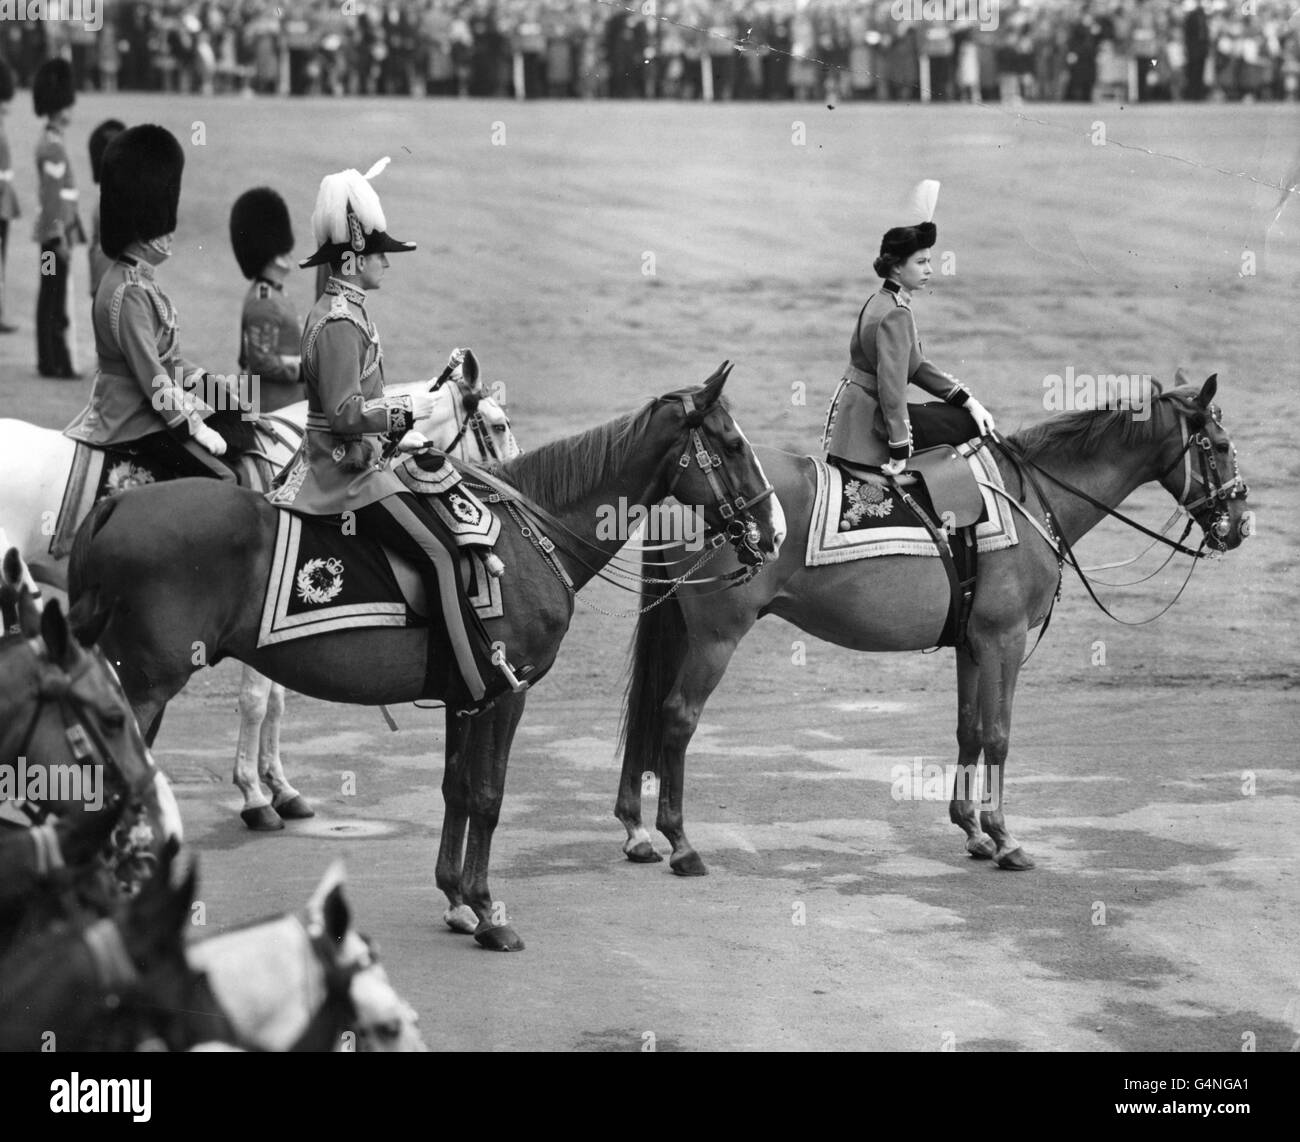 Queen Elizabeth II, riding her horse Winston, taking the salute at Horse Guards Parade. On the left is the Duke of Edinburgh, in Field Marshall uniform, and extreme left is the Duke of Gloucester in the uniform of the Colonel-in-Chief of the Scots Guards. Stock Photo